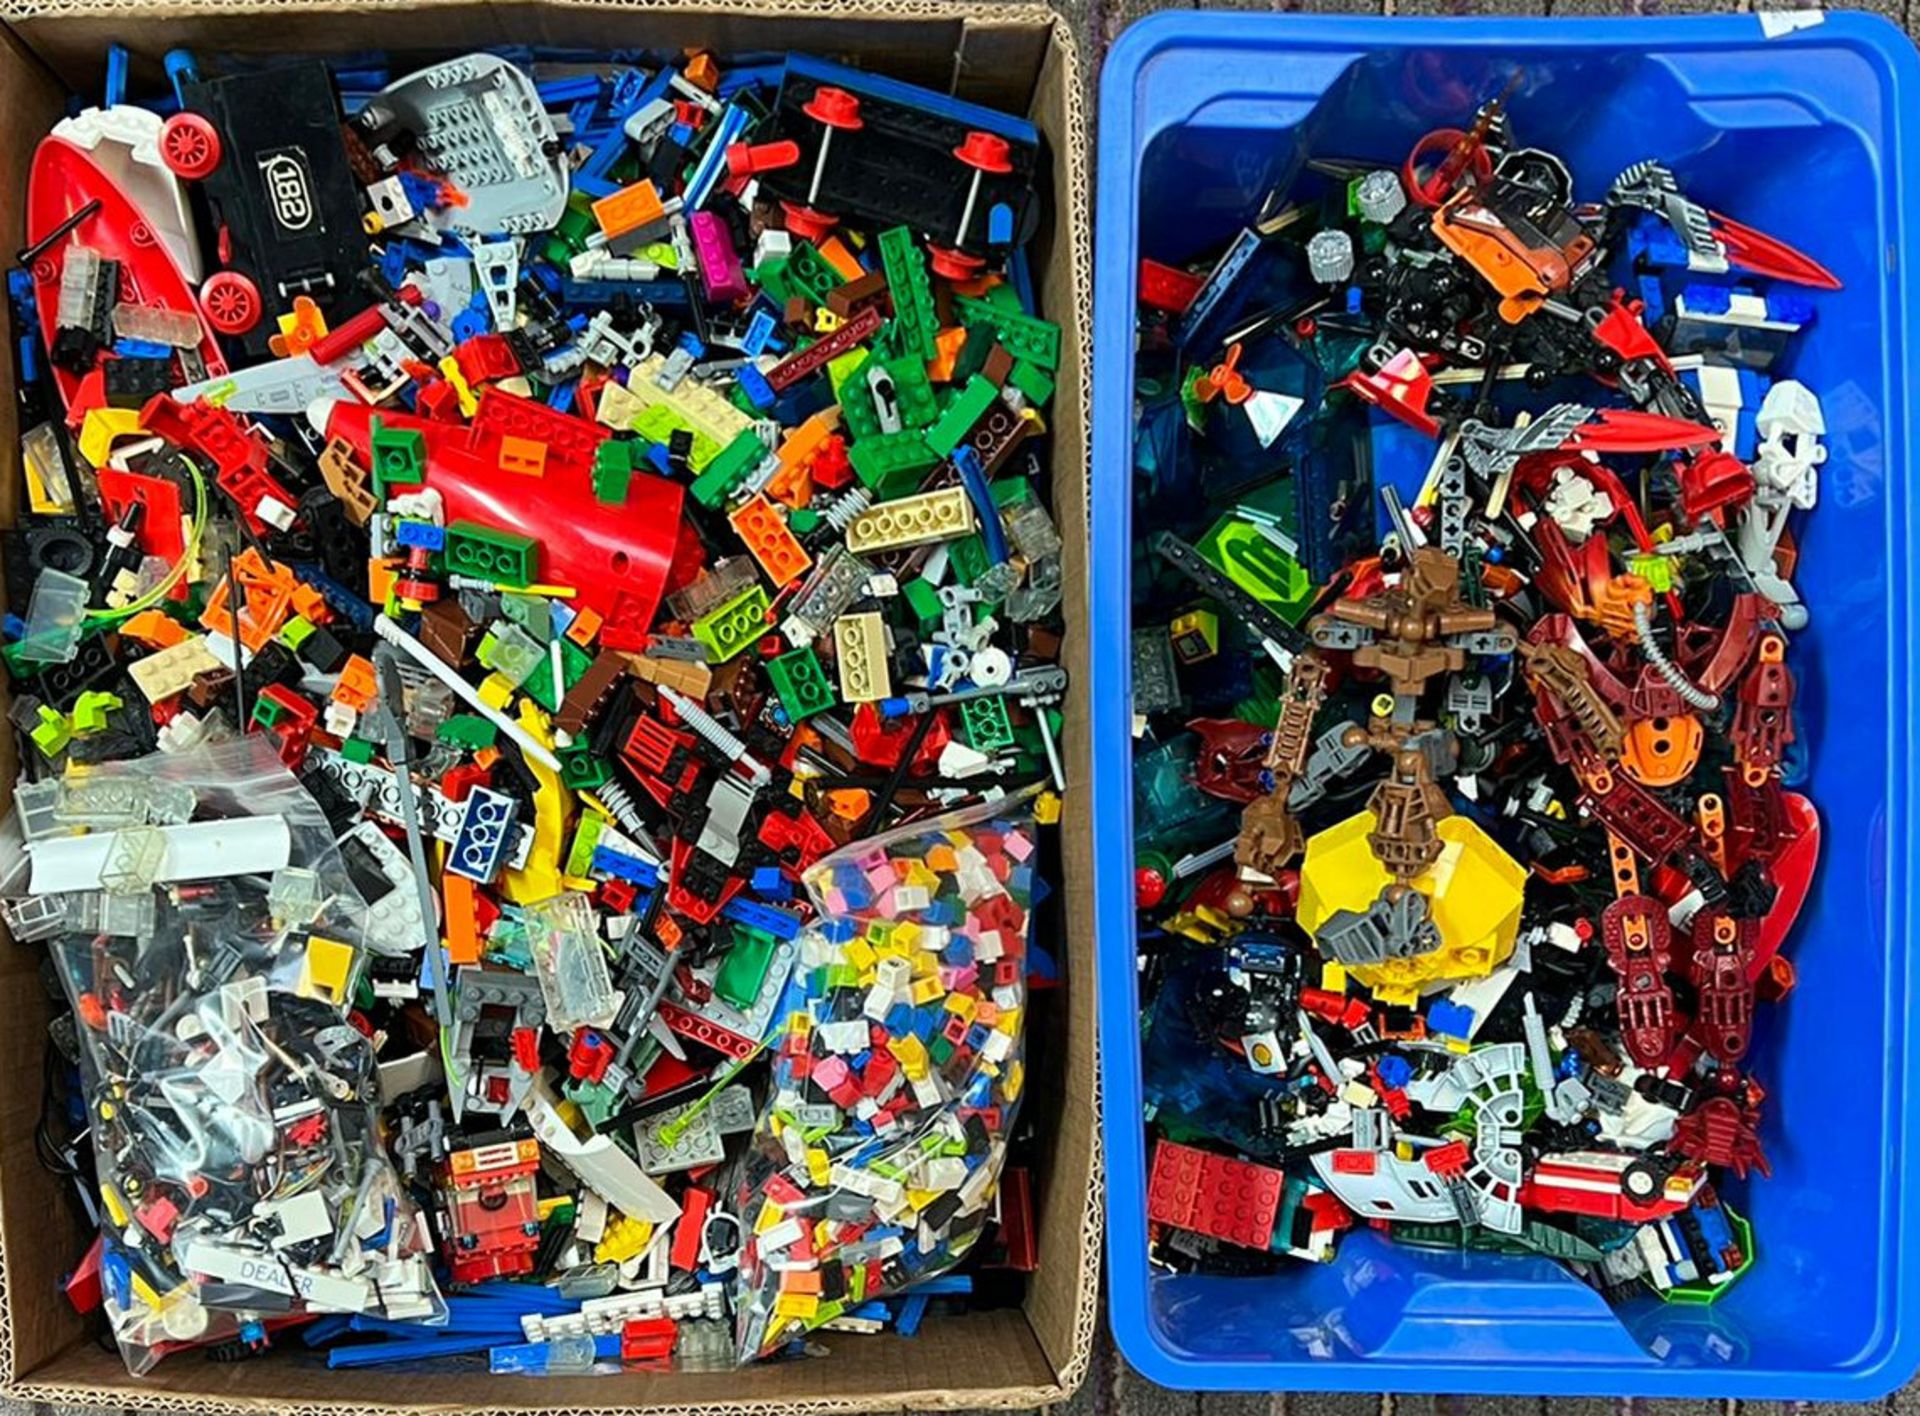 TWO BOXES OF ASSORTED LOOSE LEGO BRICKS